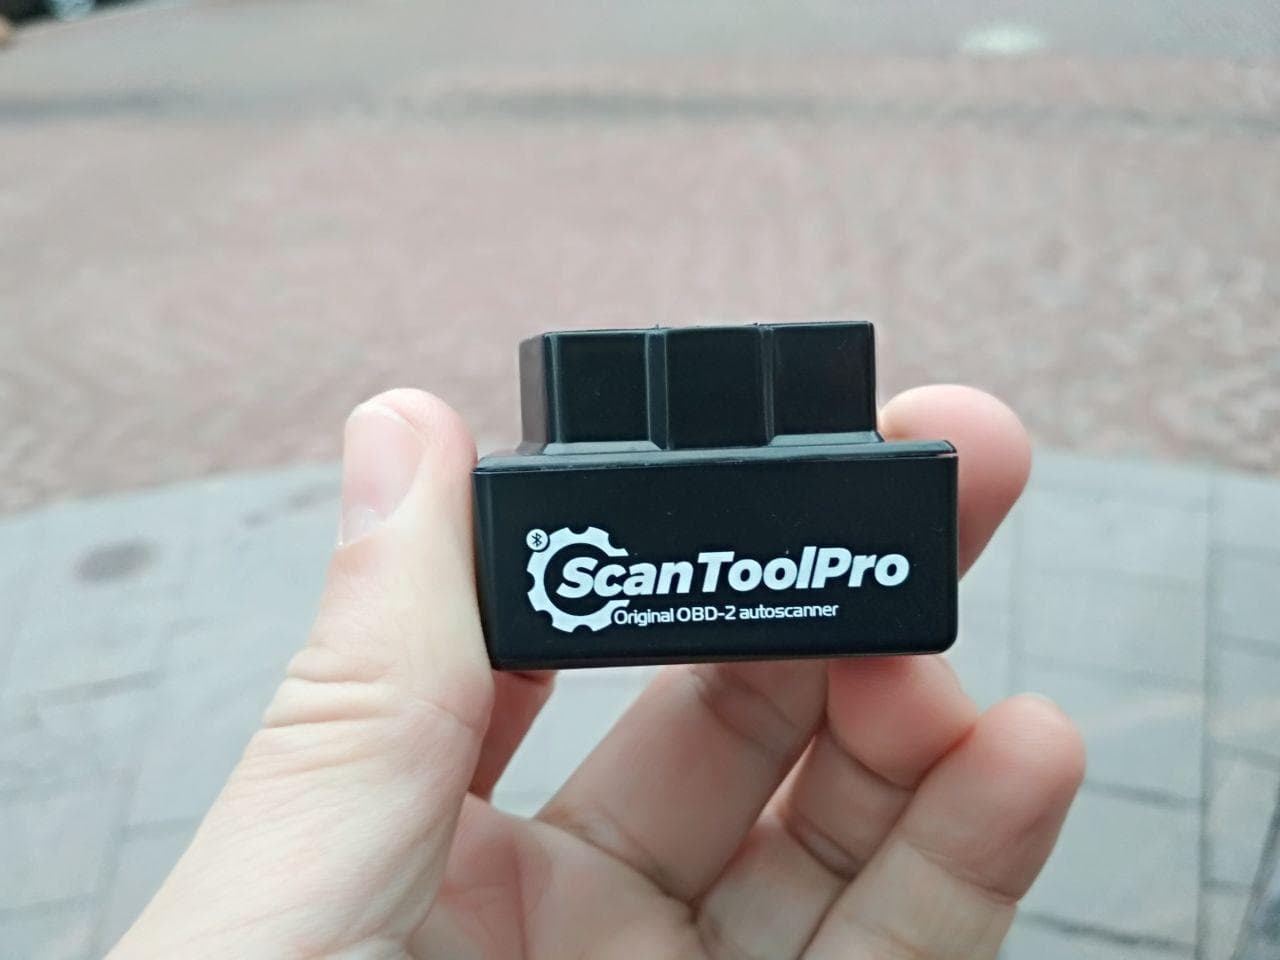 Scan tool